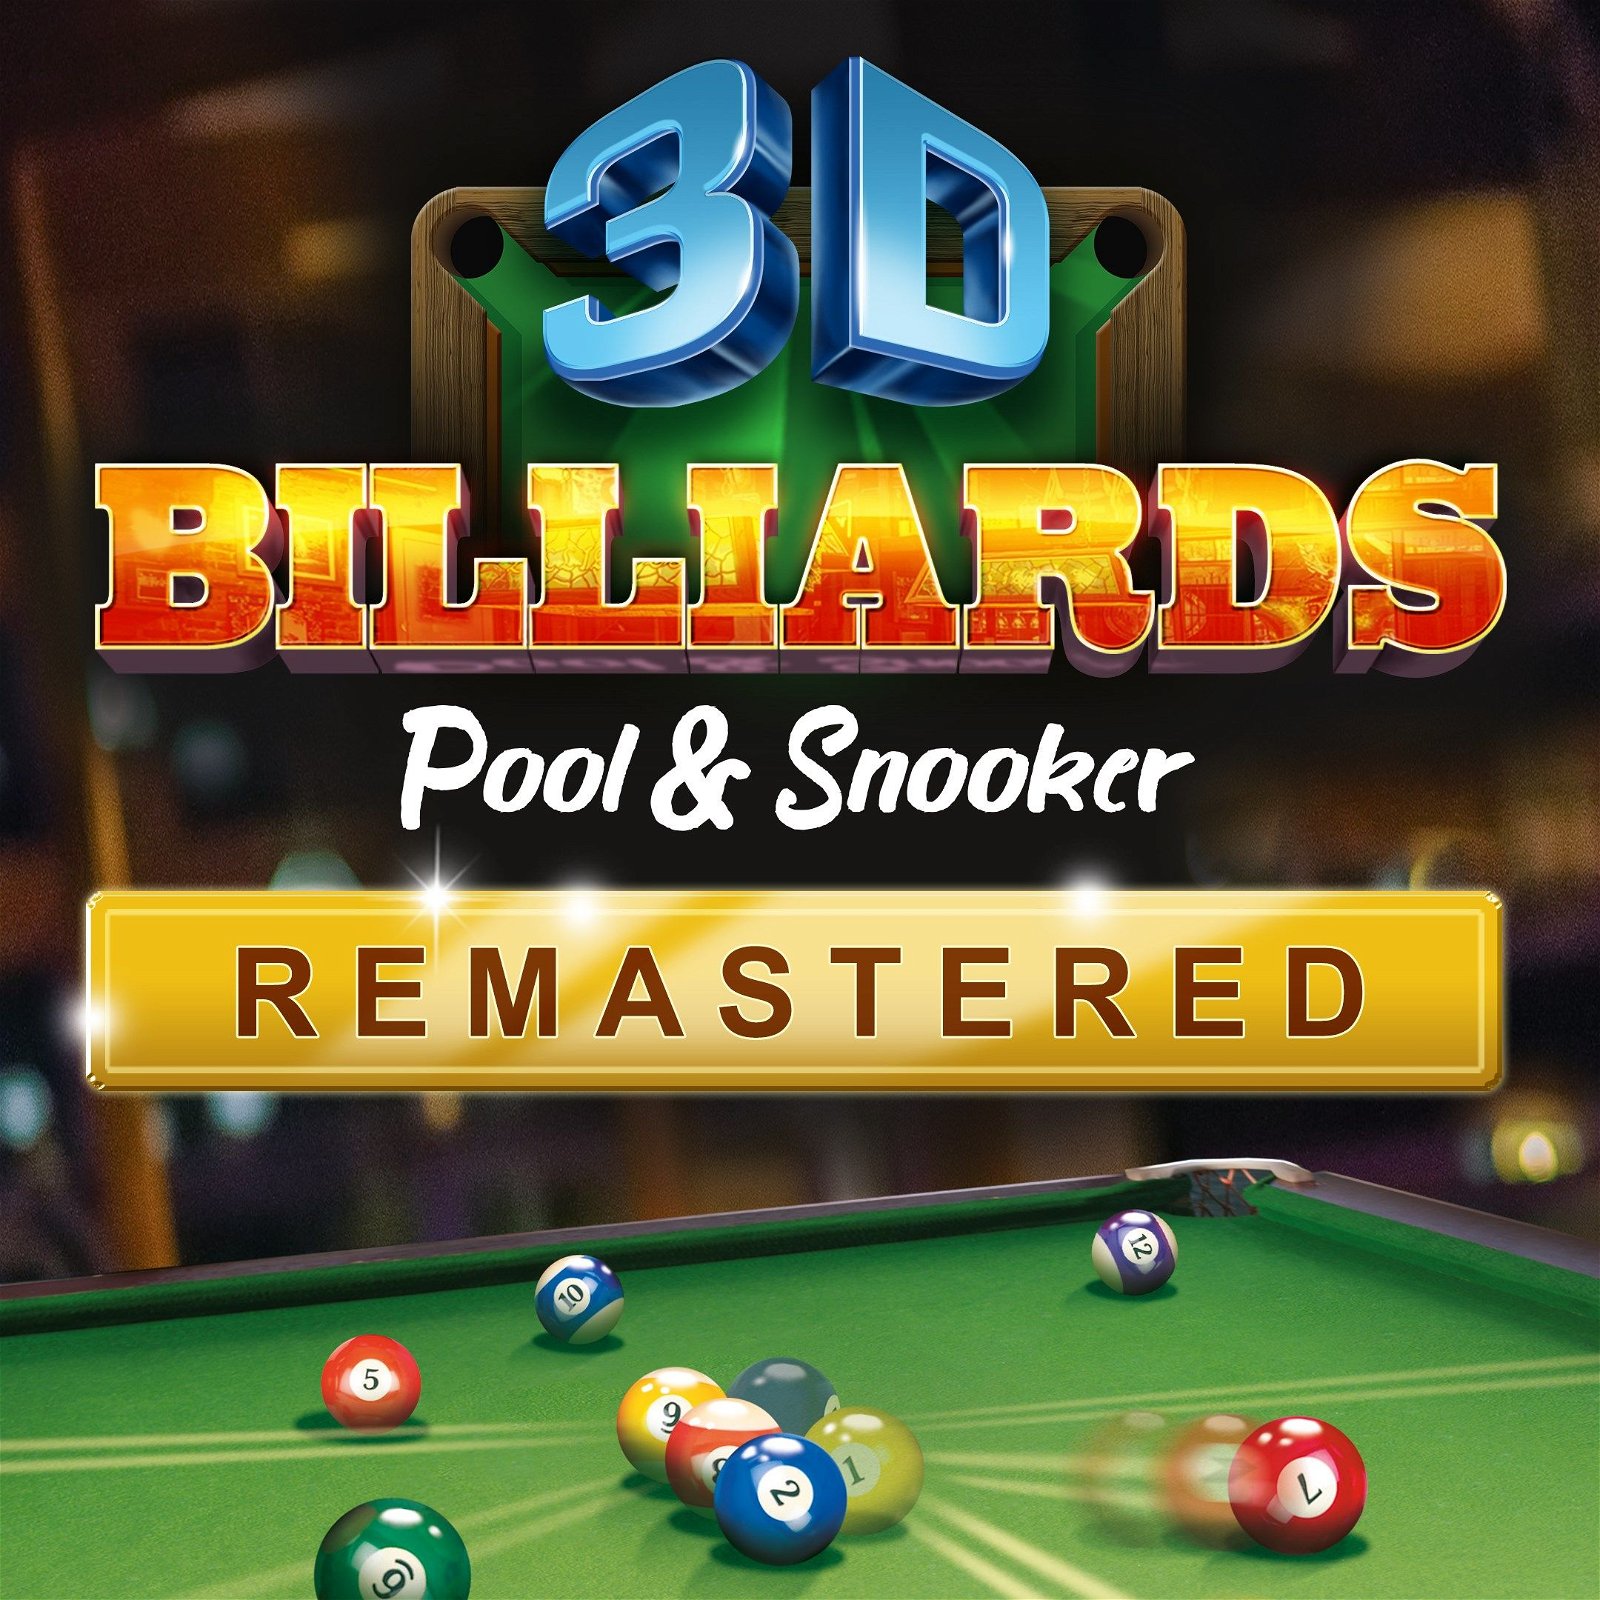 Image of 3D Billiards - Pool & Snooker - Remastered